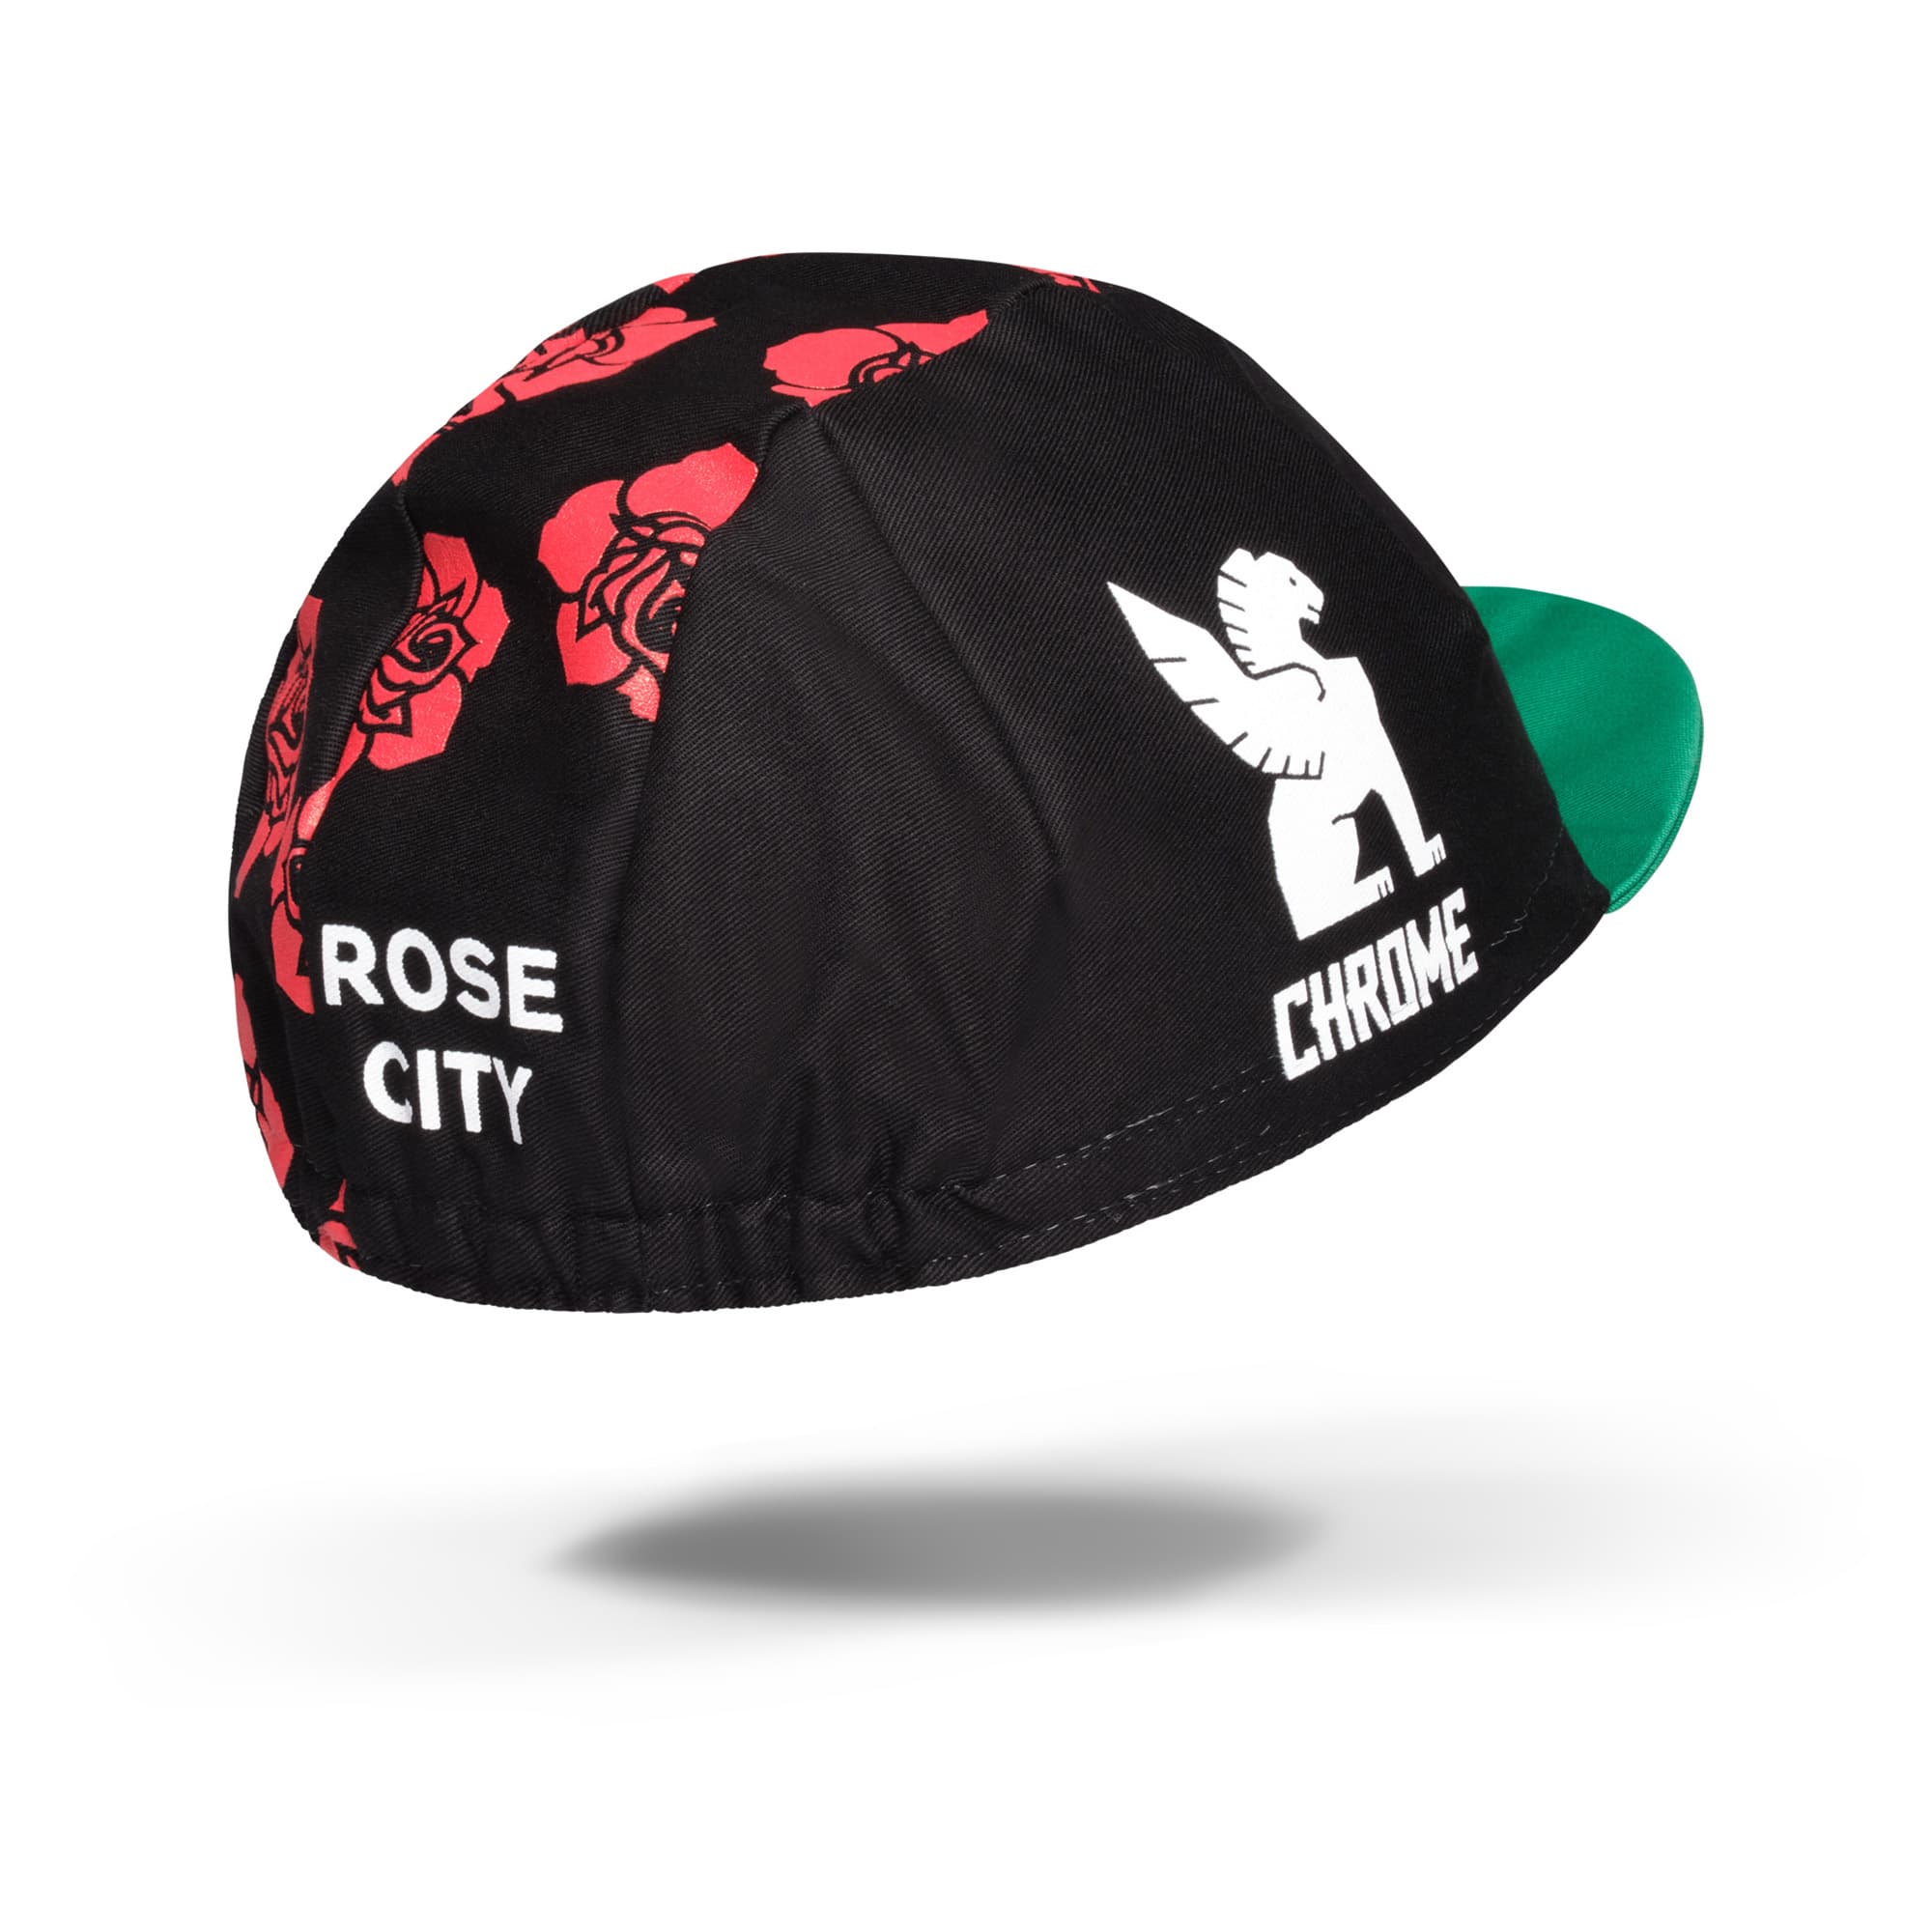 Chrome Portland Rides Cycling Cap in black back view #color_portland roses